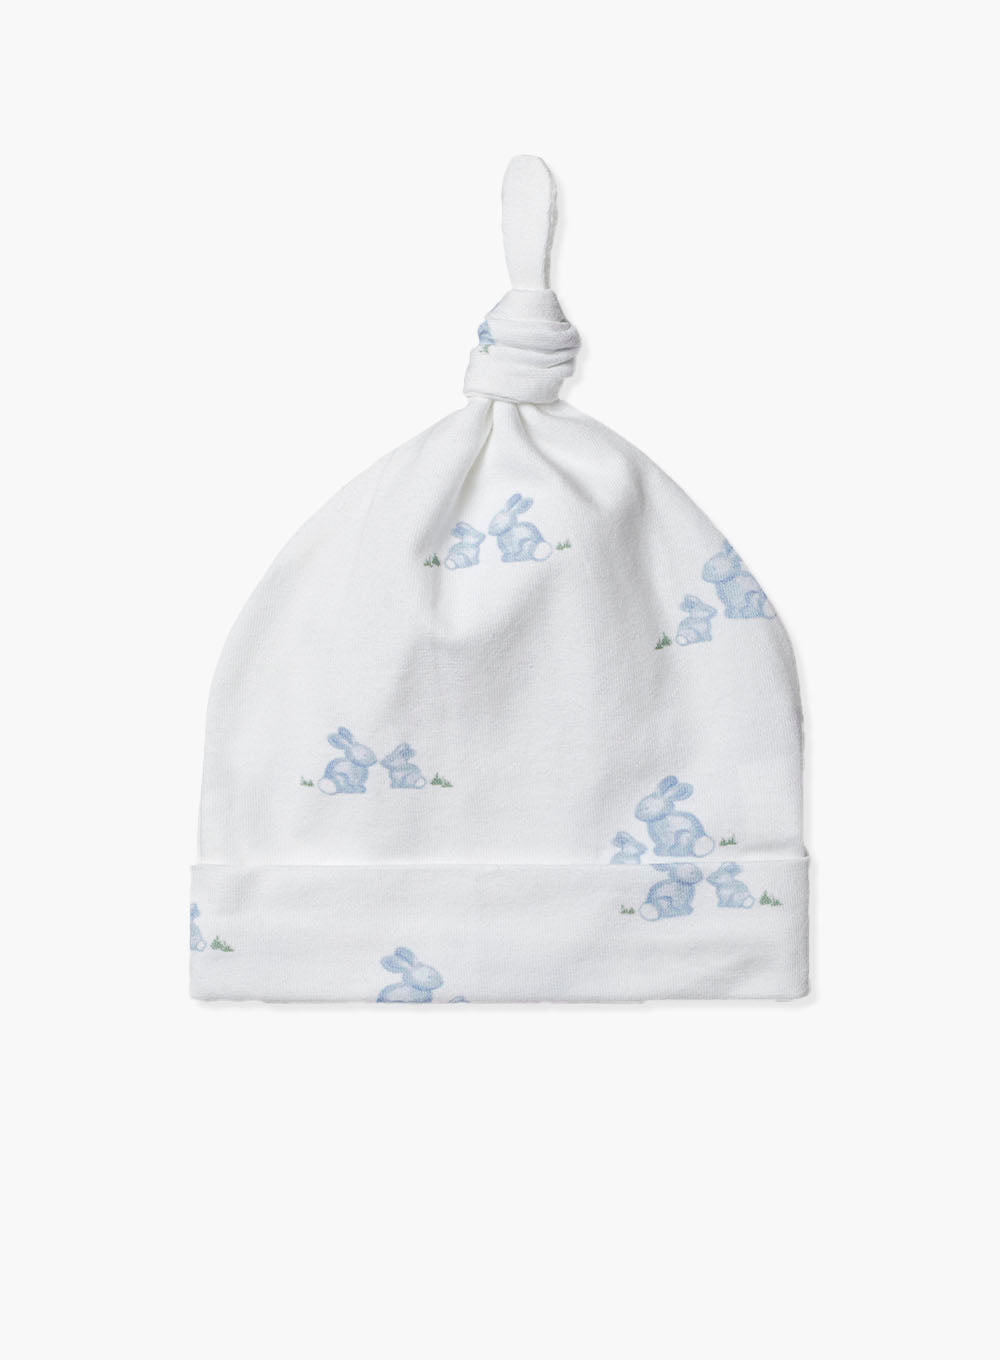 Baby Hat in Pale Blue Bunny